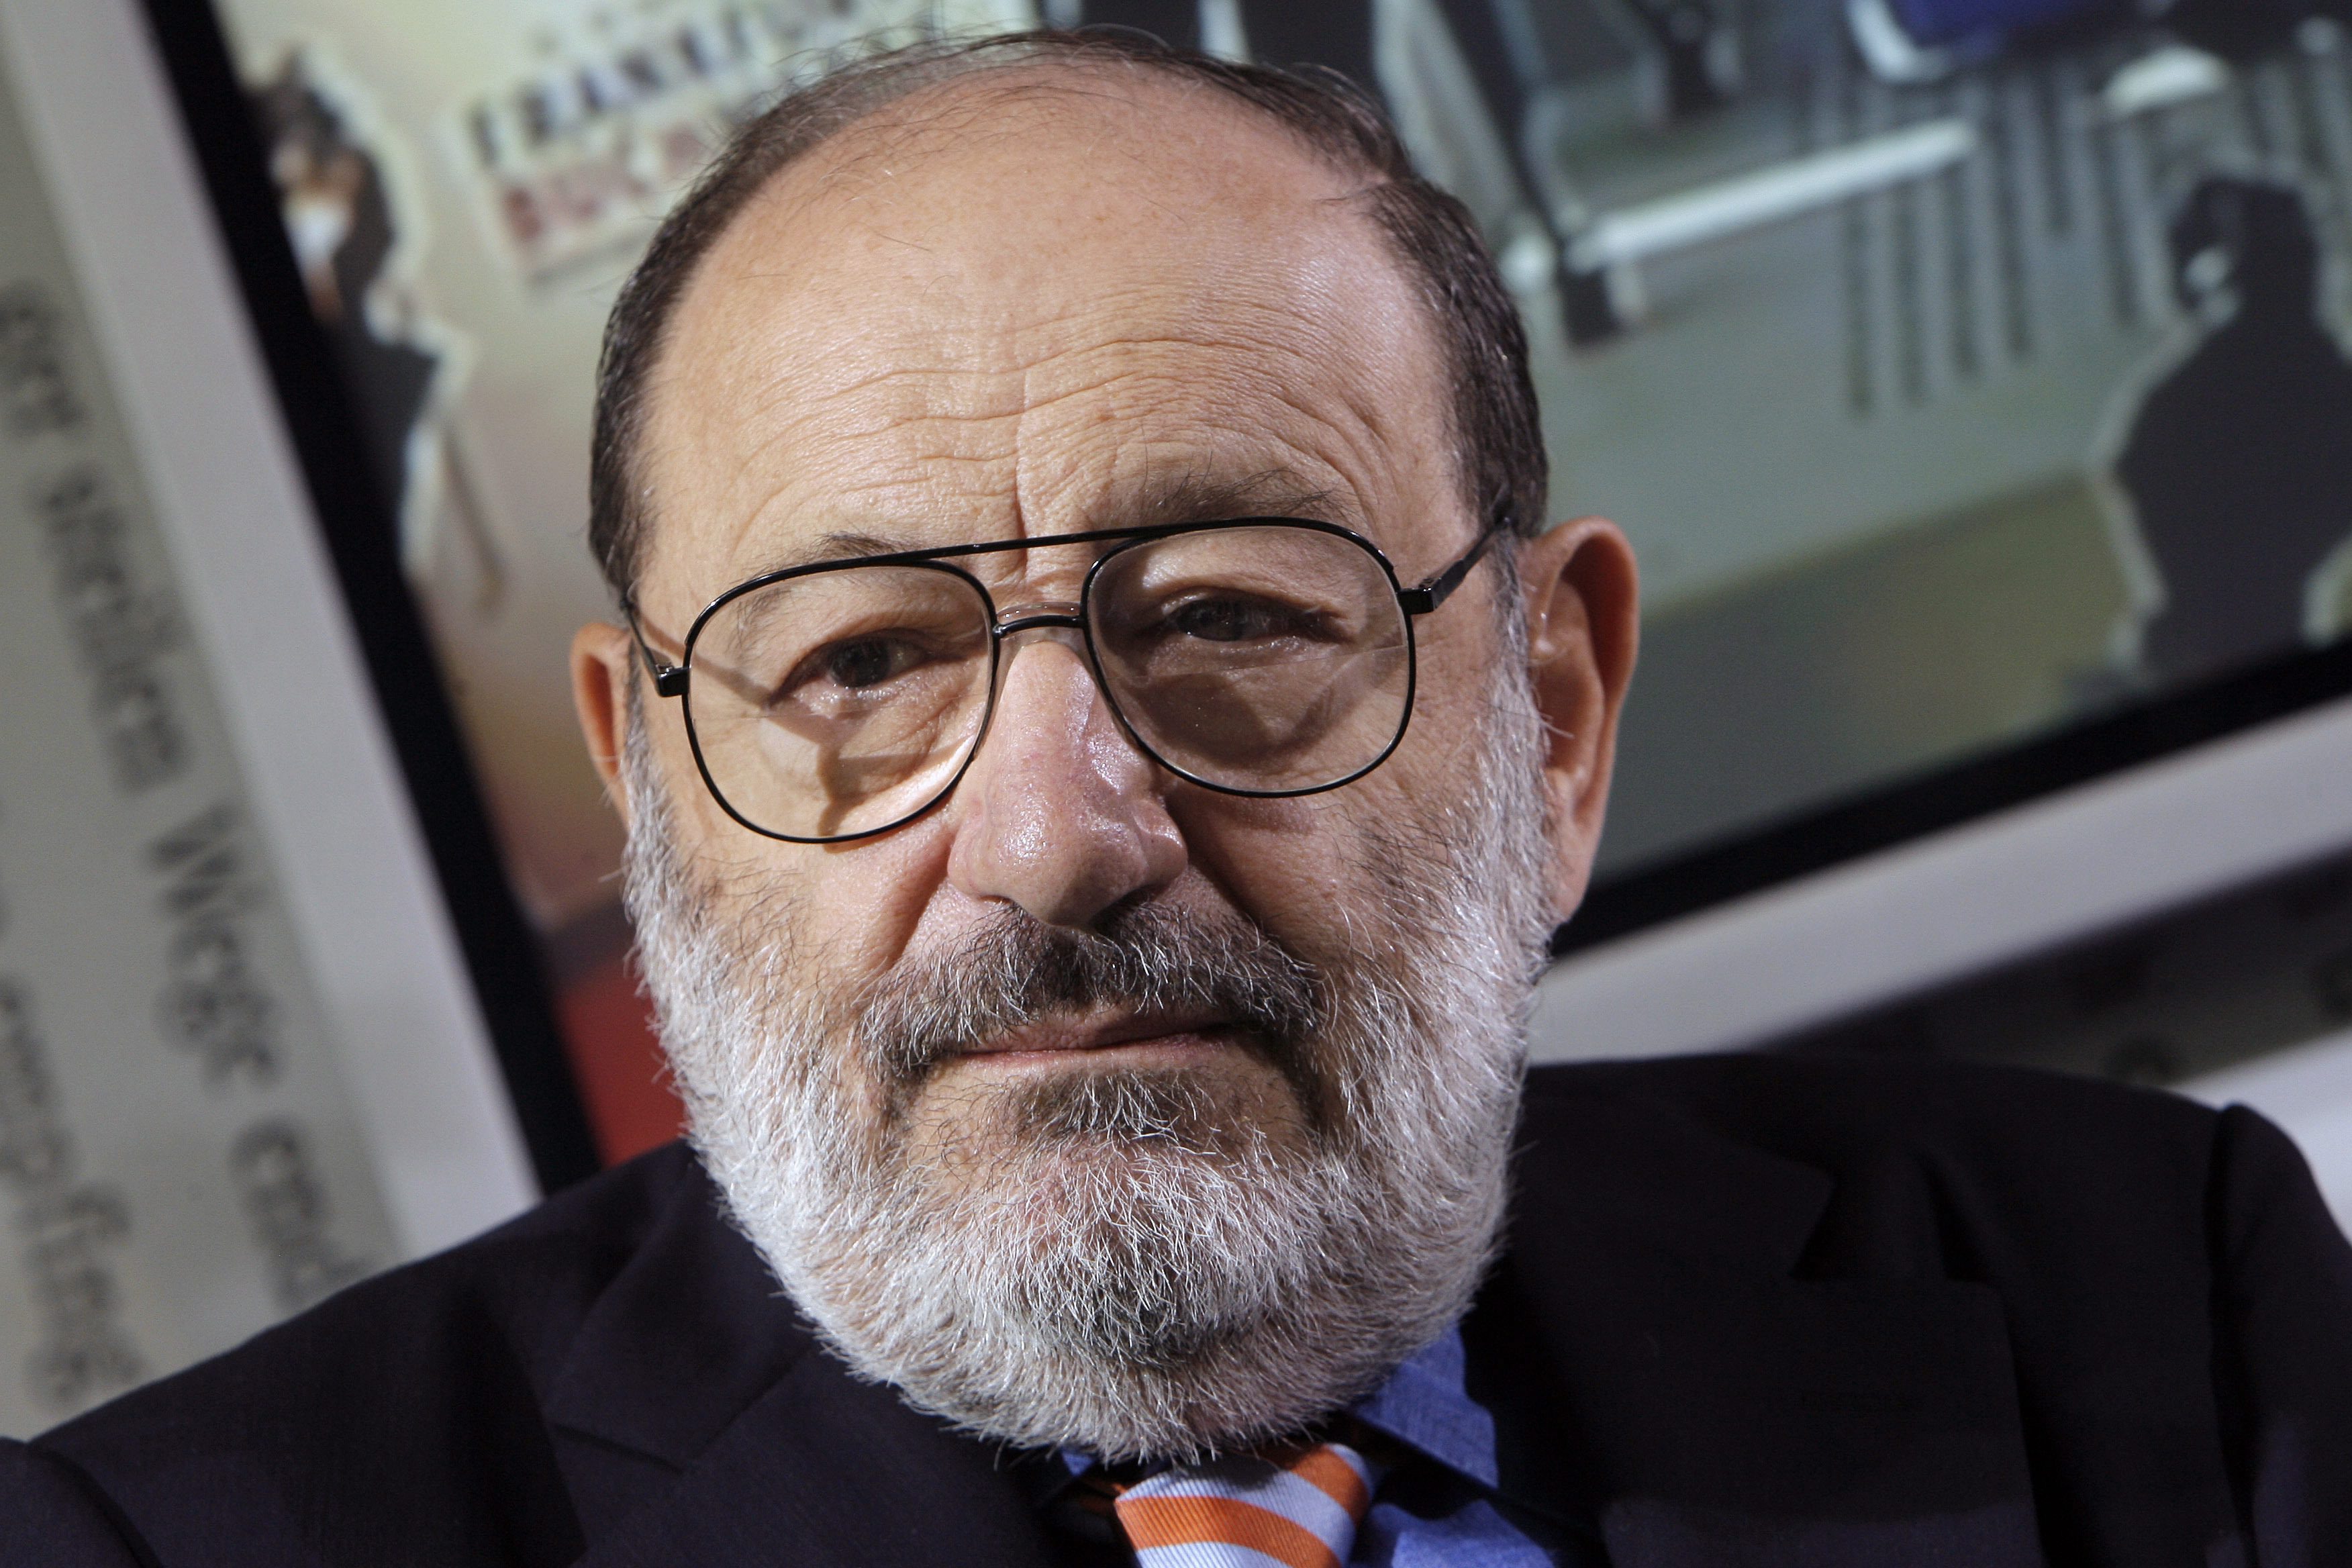 2007-10-11 00:00:00 epa05171552 A picture made available on 20 February 2016 shows Italian writer Umberto Eco at the Frankfurt book fair in Frankfurt, Germany, 11 October 2007. The Italian best-selling writer and philosopher Umberto Eco, has died at his home in Italy late on 19 February 2016 according to his family. EPA/ARNO BURGI